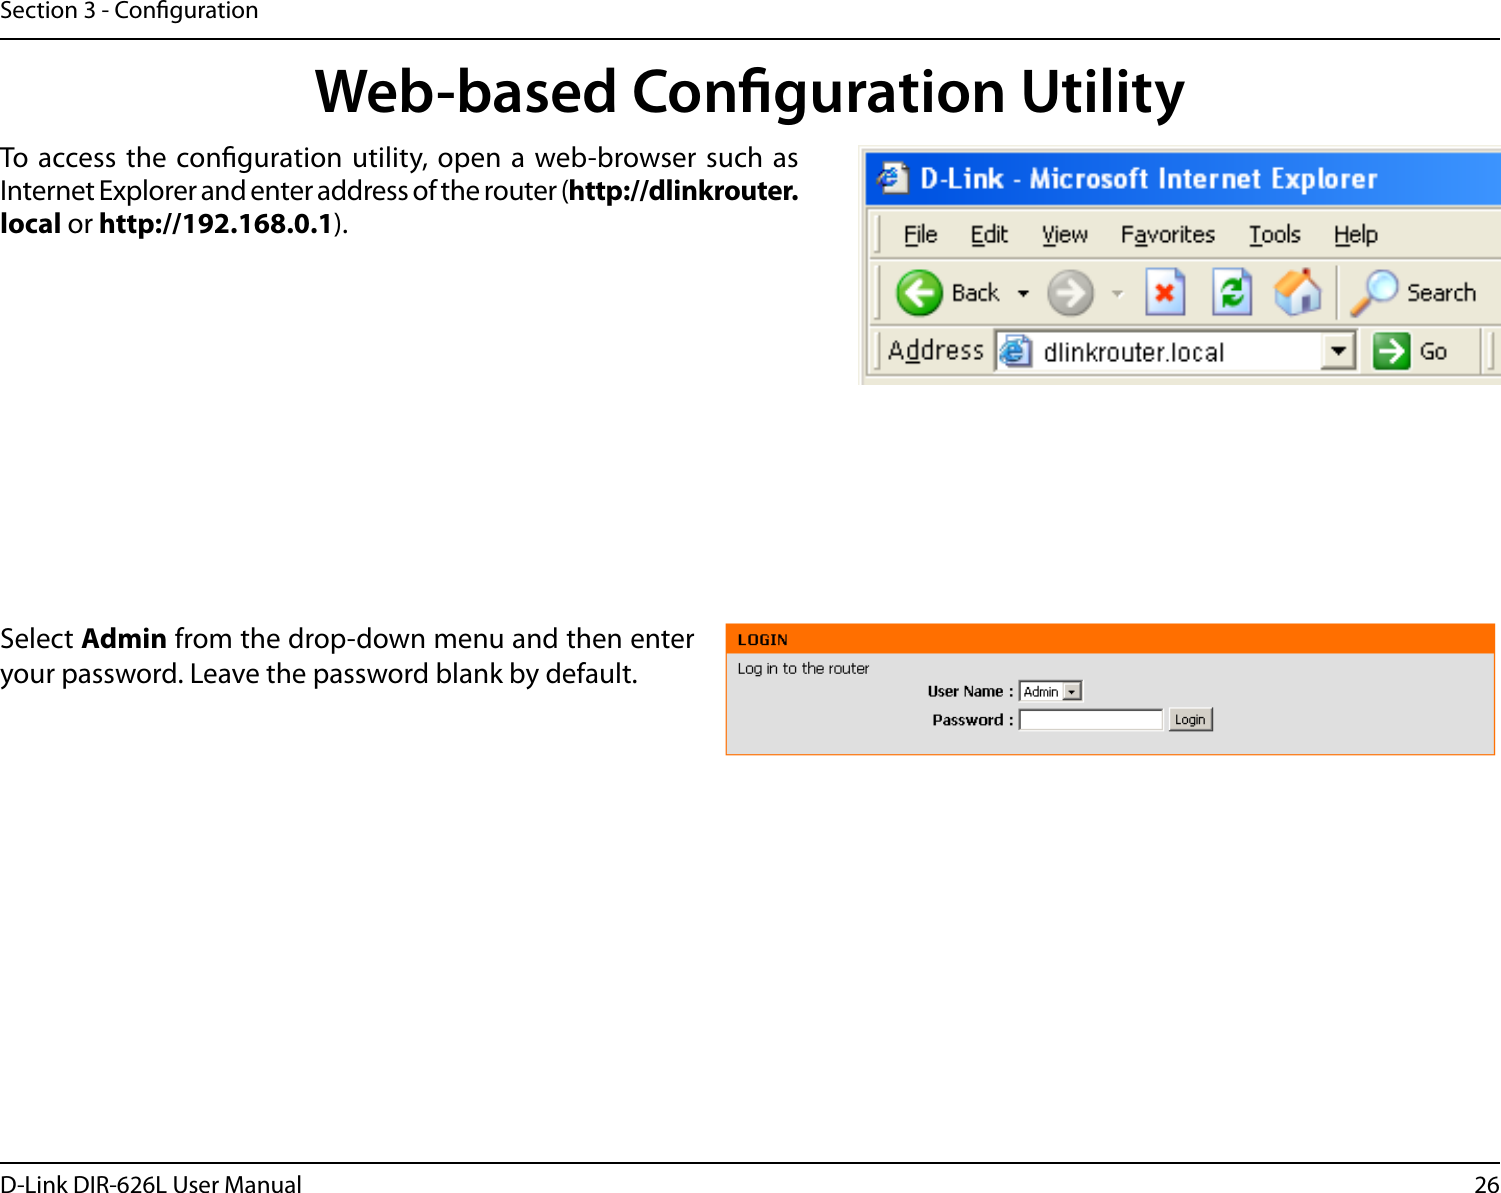 26D-Link DIR-626L User ManualSection 3 - CongurationWeb-based Conguration UtilitySelect Admin from the drop-down menu and then enter your password. Leave the password blank by default.To  access the conguration utility, open a web-browser such as Internet Explorer and enter address of the router (http://dlinkrouter.local or http://192.168.0.1).